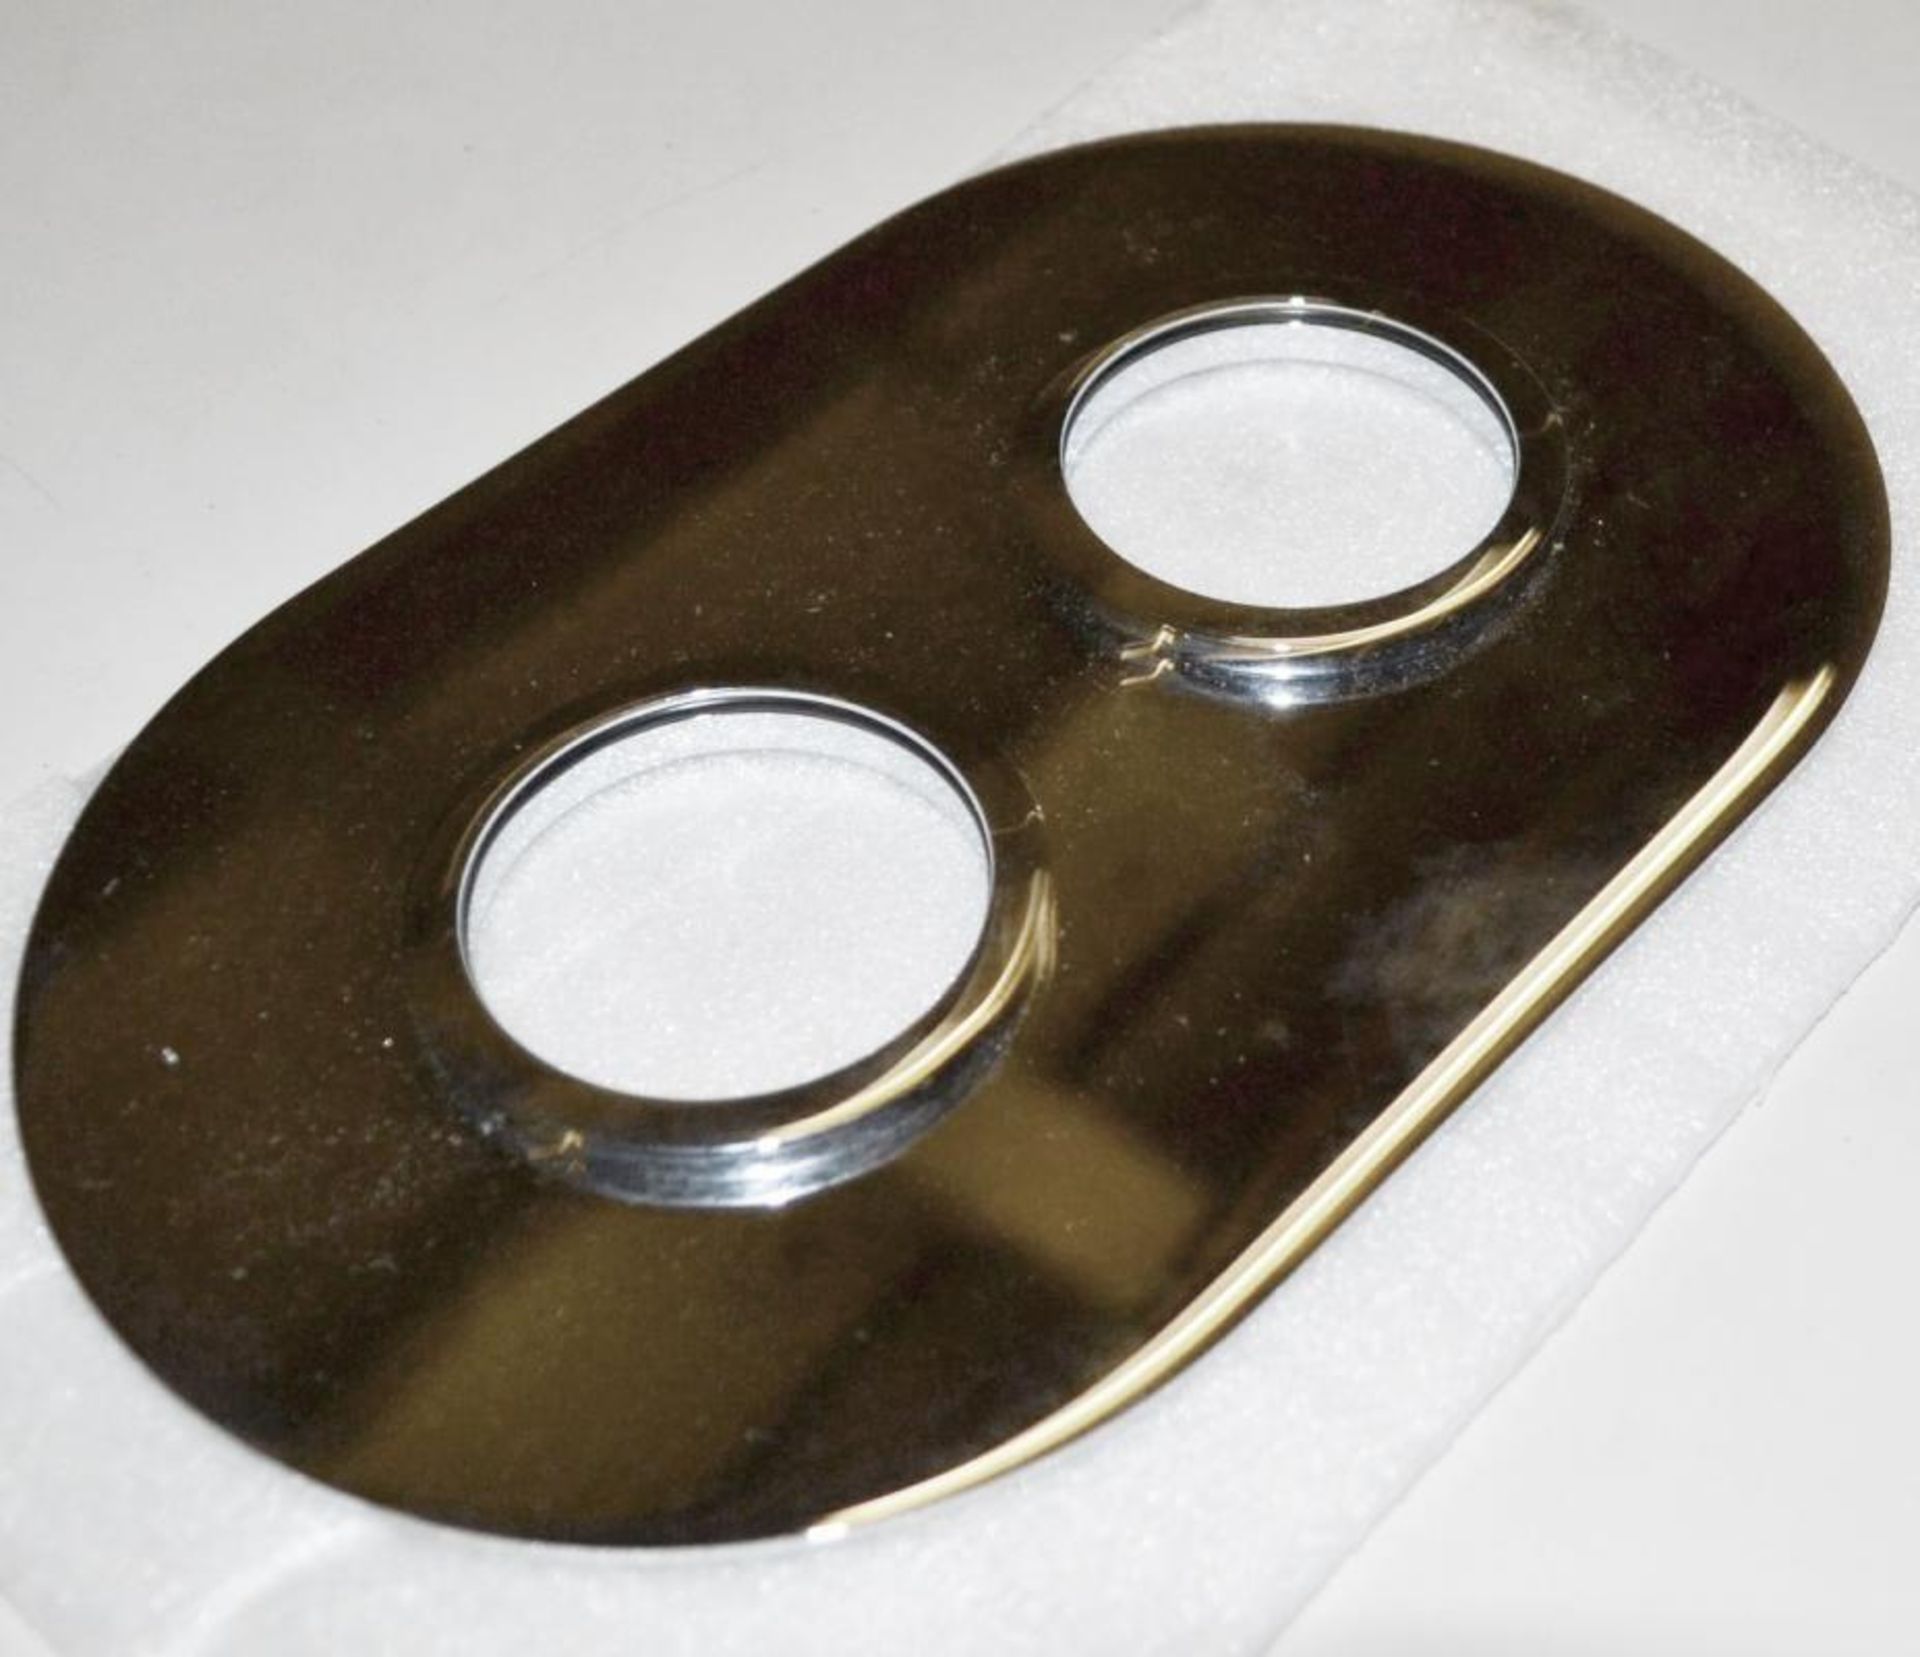 1 x Twin Hole Oval Shower Valve Cover Plate - Ref: DY115/CNP1003 - CL190 - Unused Stock In Its Origi